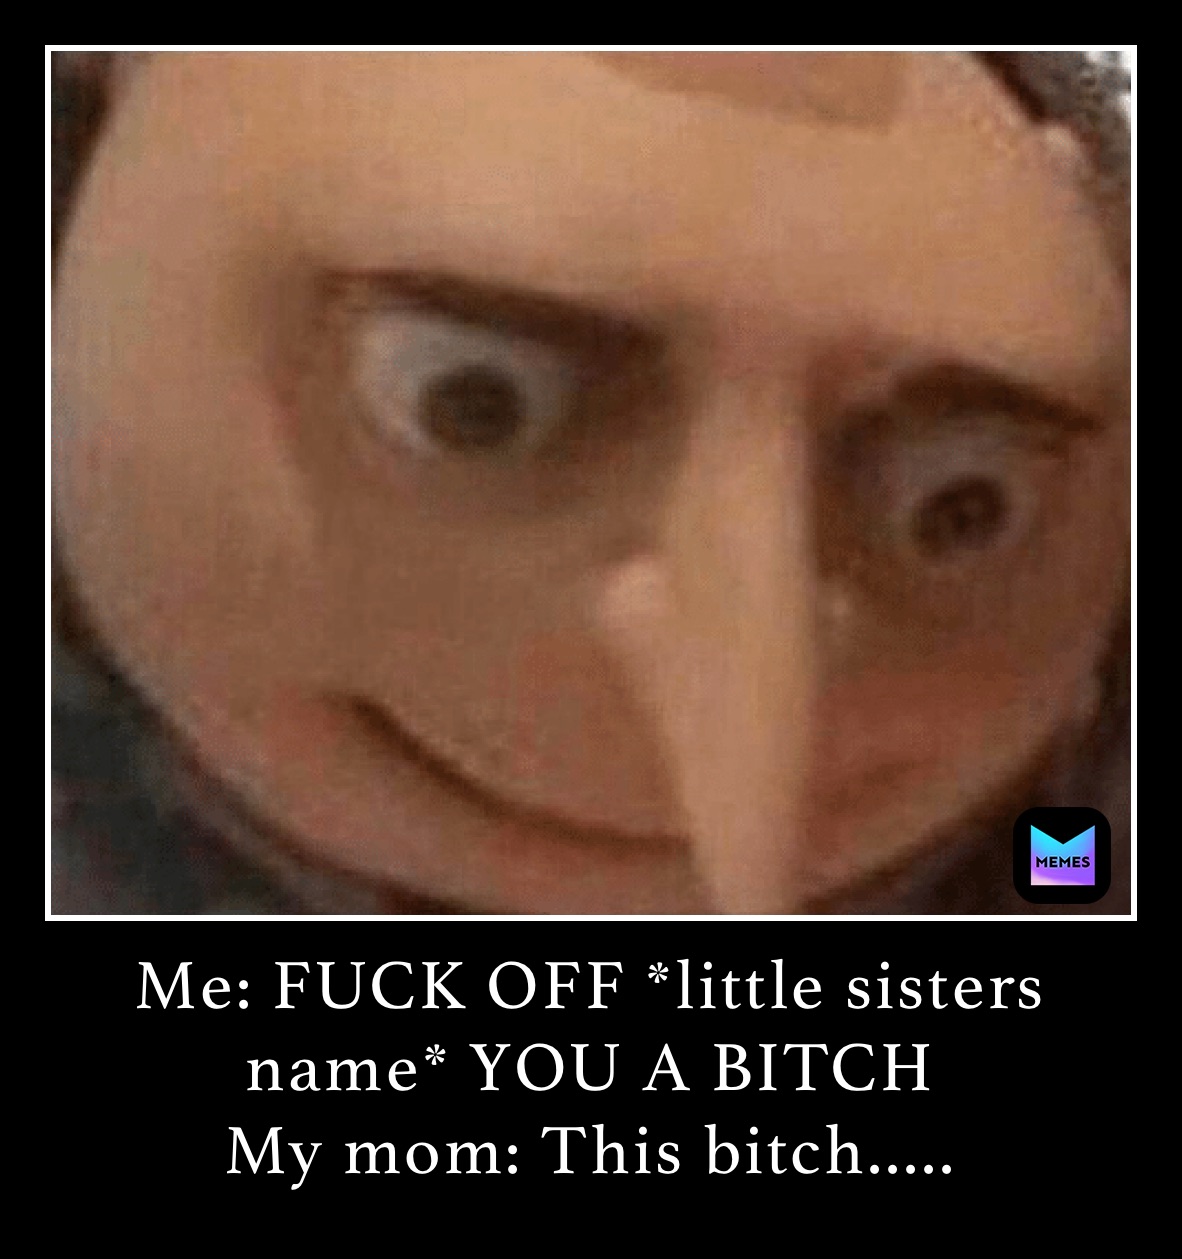 Me: FUCK OFF *little sisters name* YOU A BITCH
My mom: This bitch.....